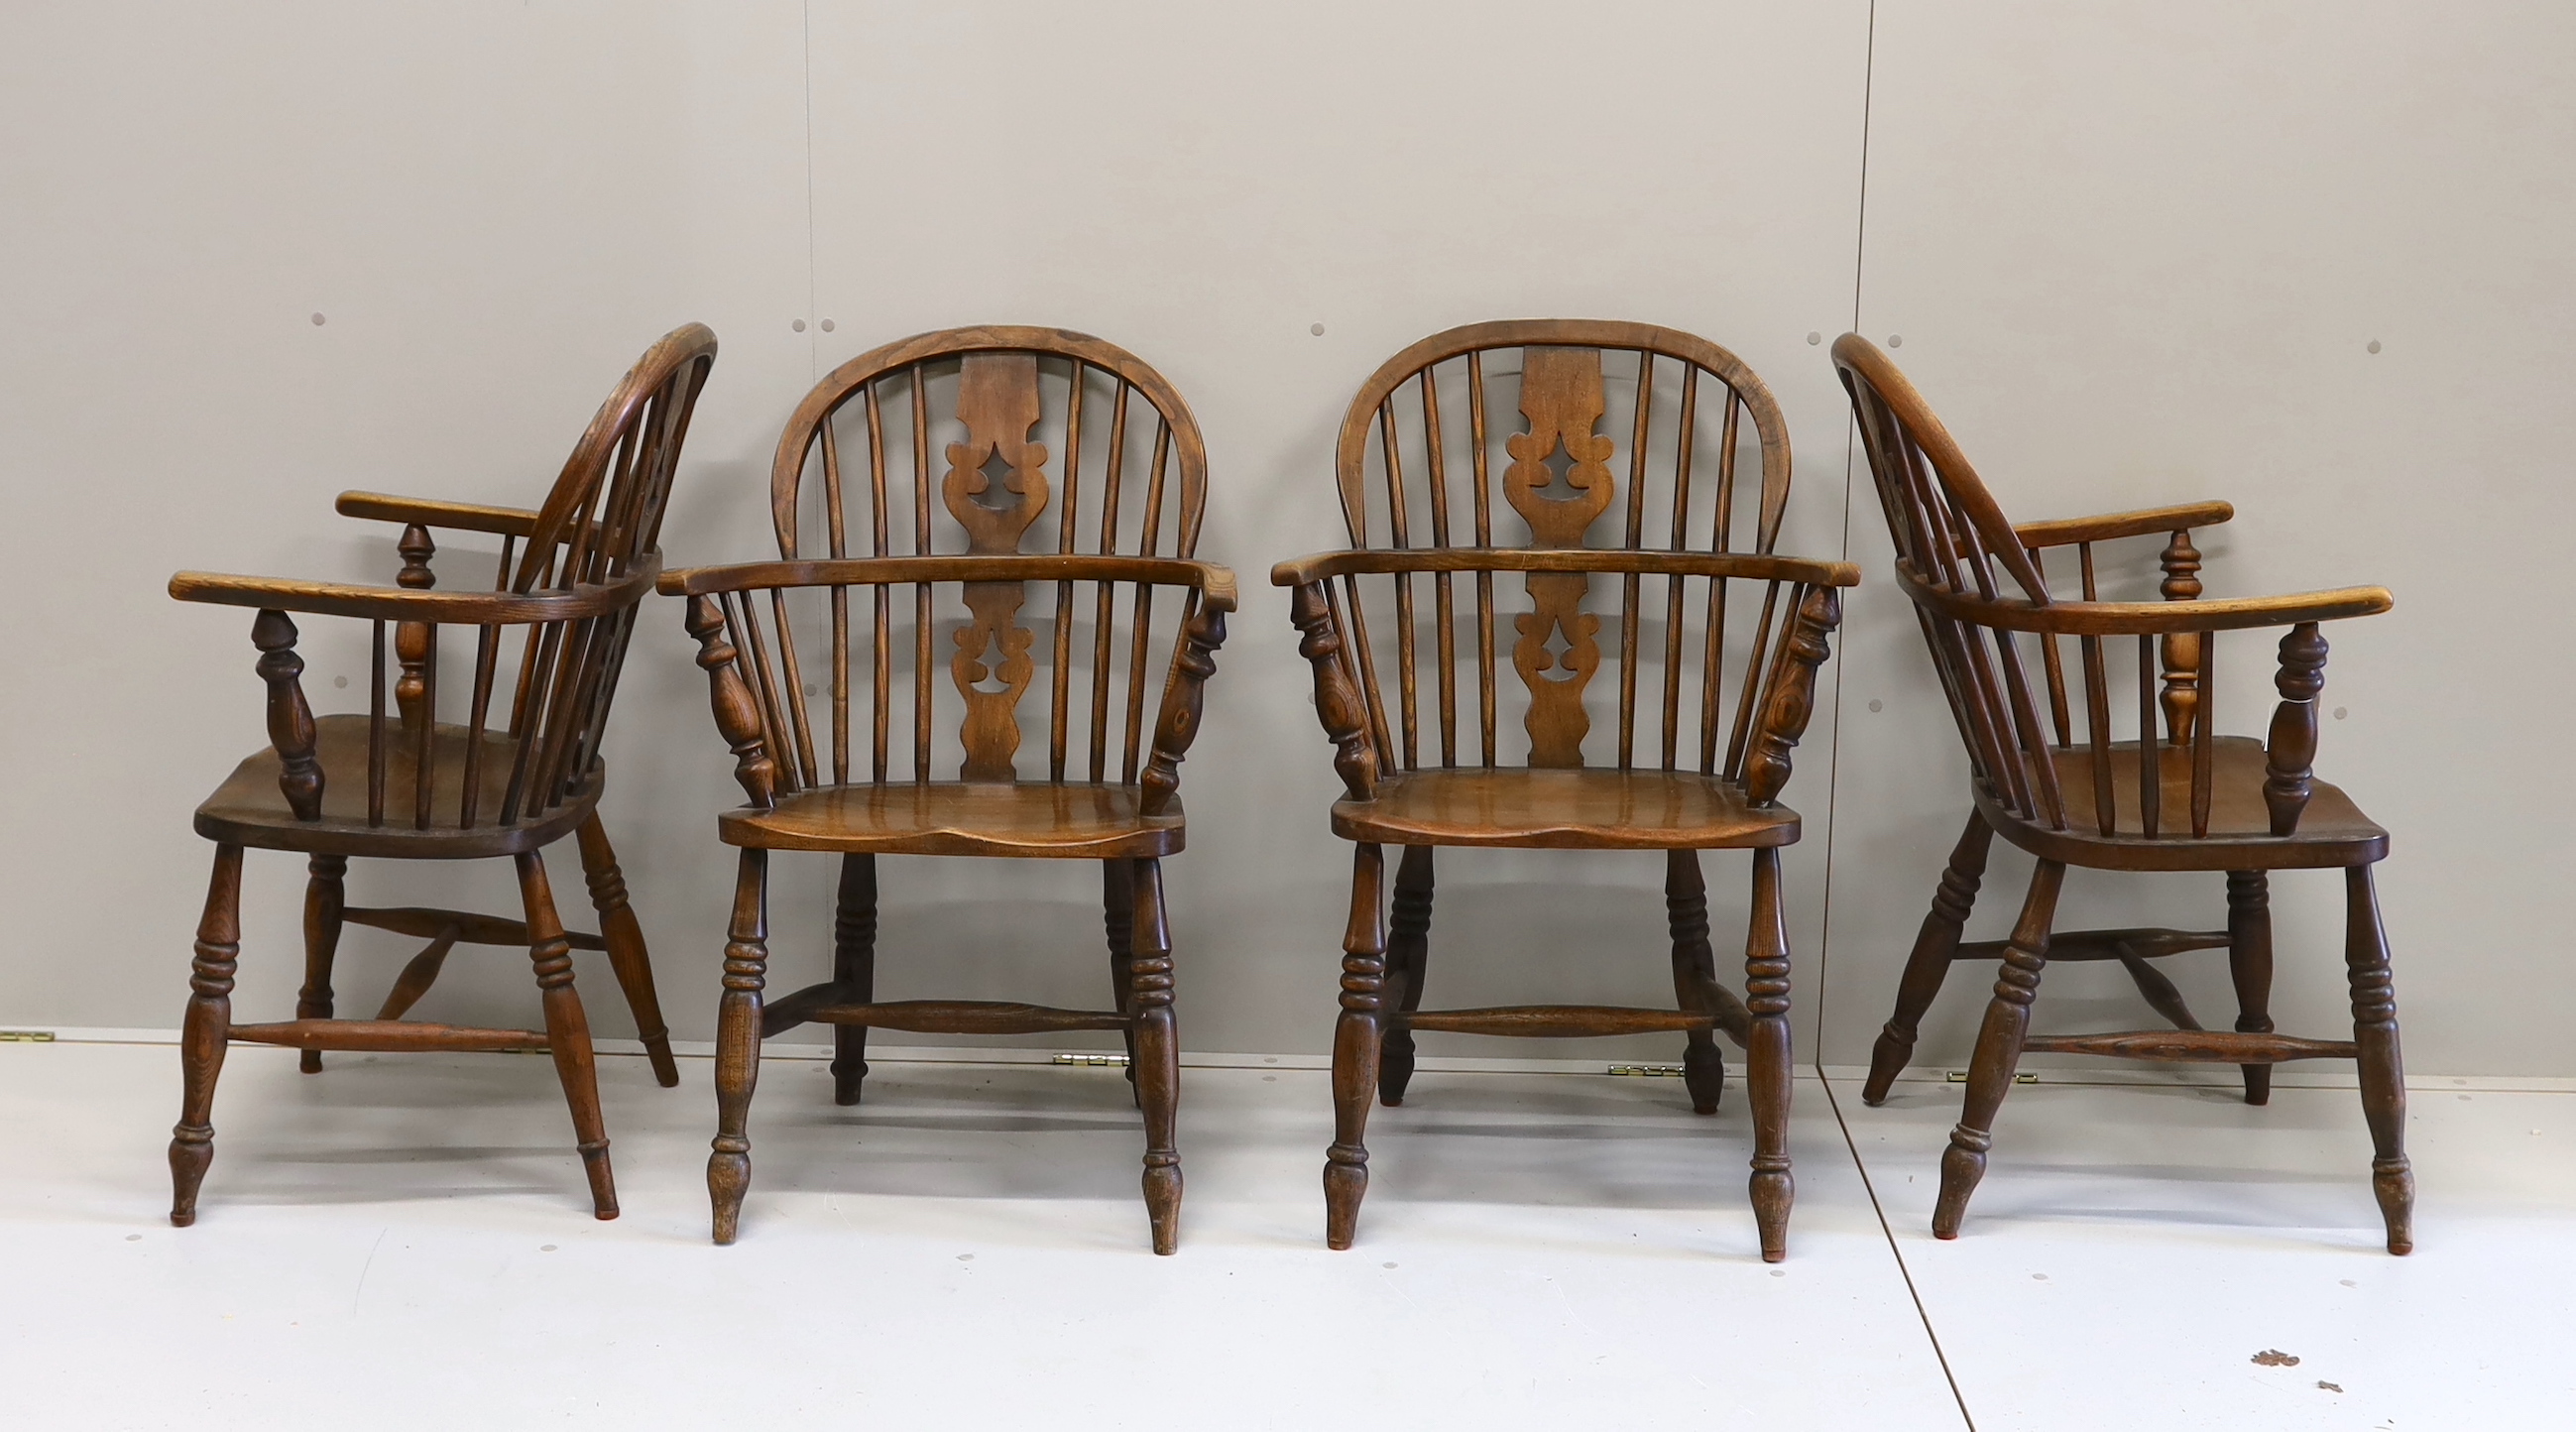 A near set of four 19th century Nottingham area elm, ash and beech Windsor elbow chairs, possibly by Allsop & Son, width 58cm, depth 39cm, height 94cm